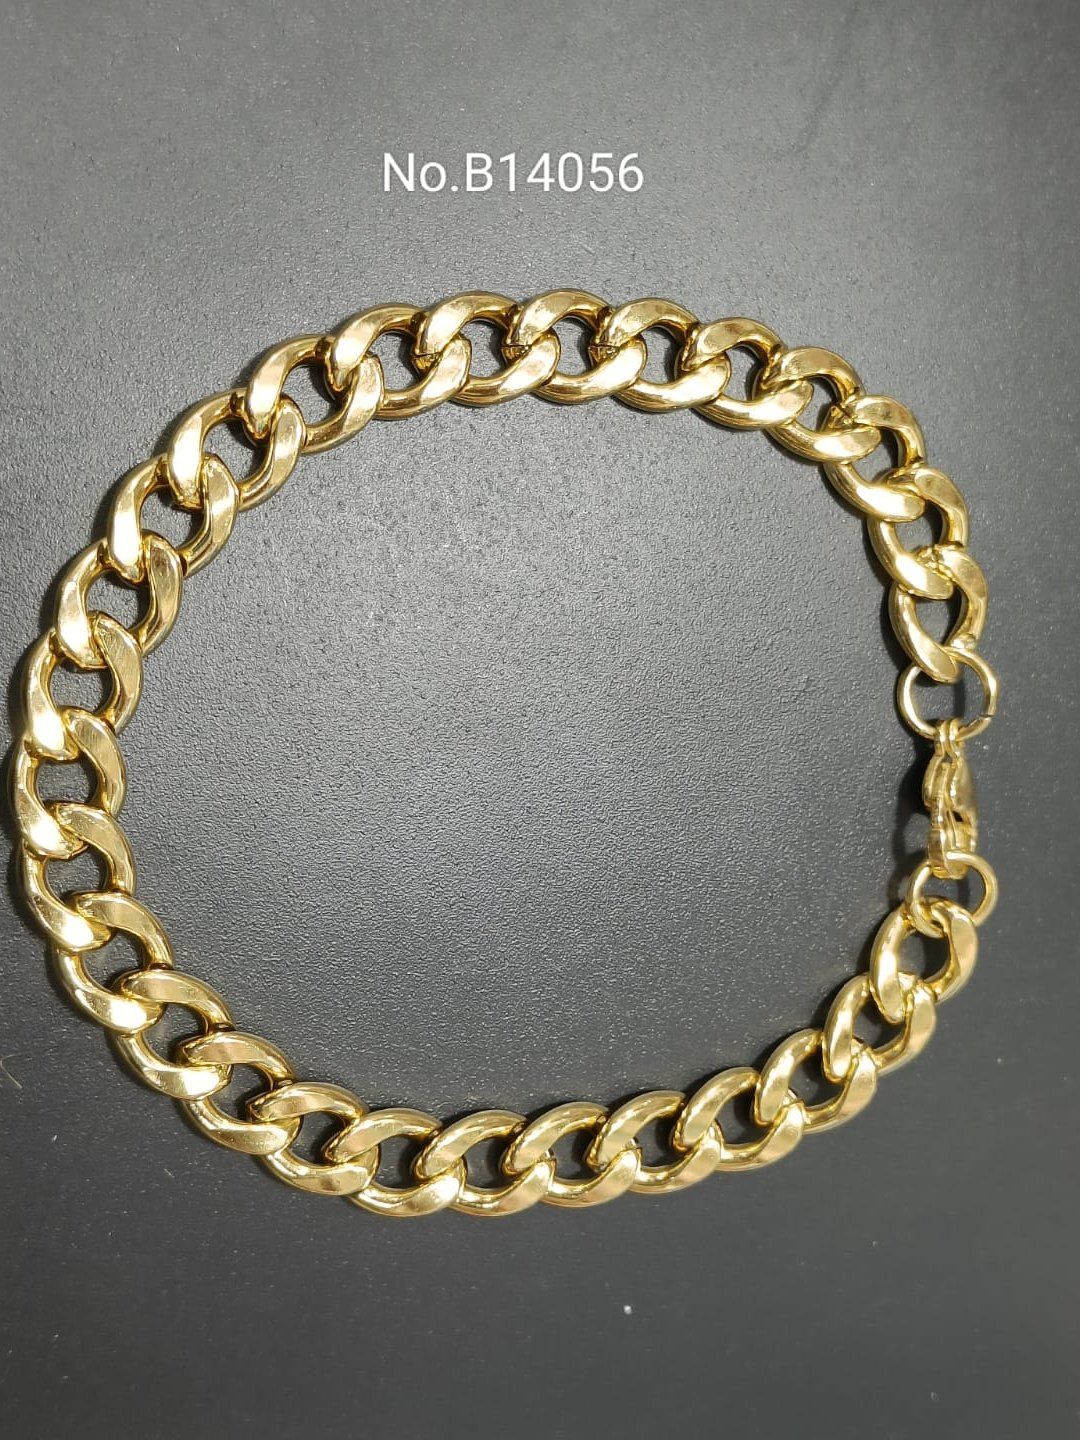 Buy Daily Brass 22K Gold Plated Stylish Cable Link Chain Bracelet for Men  Boys Online In India At Discounted Prices